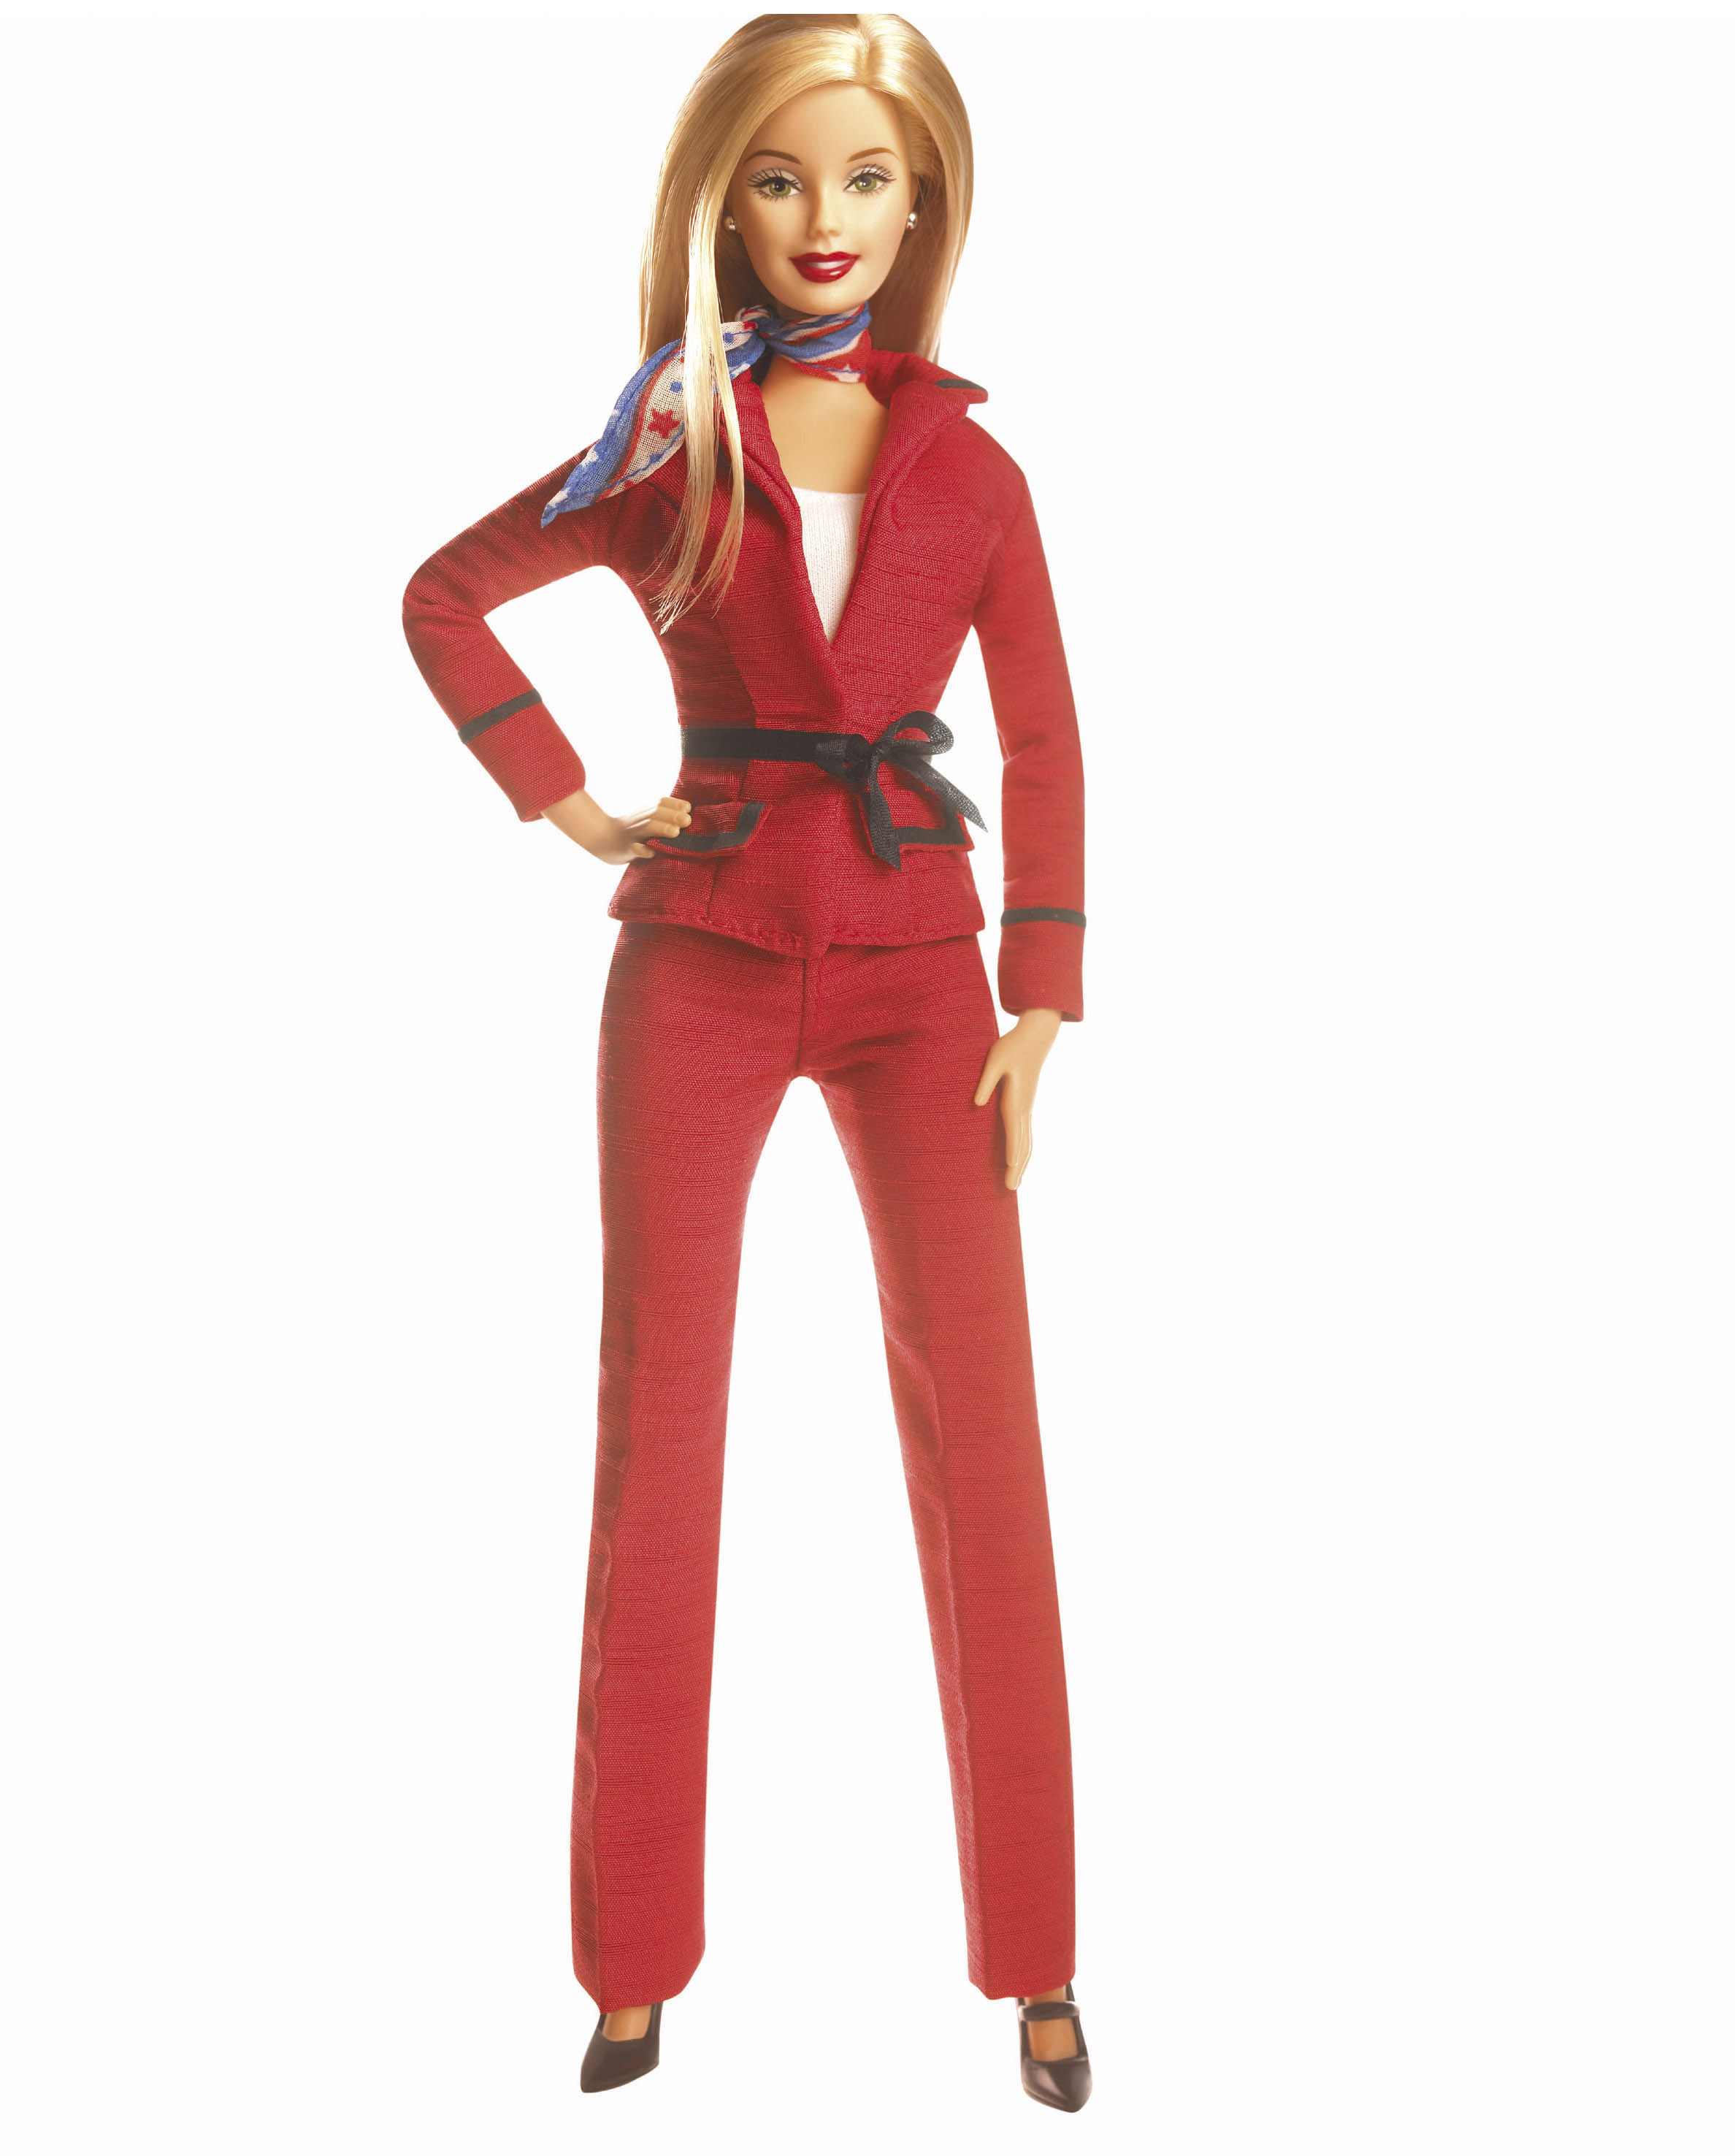 Barbie for President 2004 (Business Wire / Getty Images)